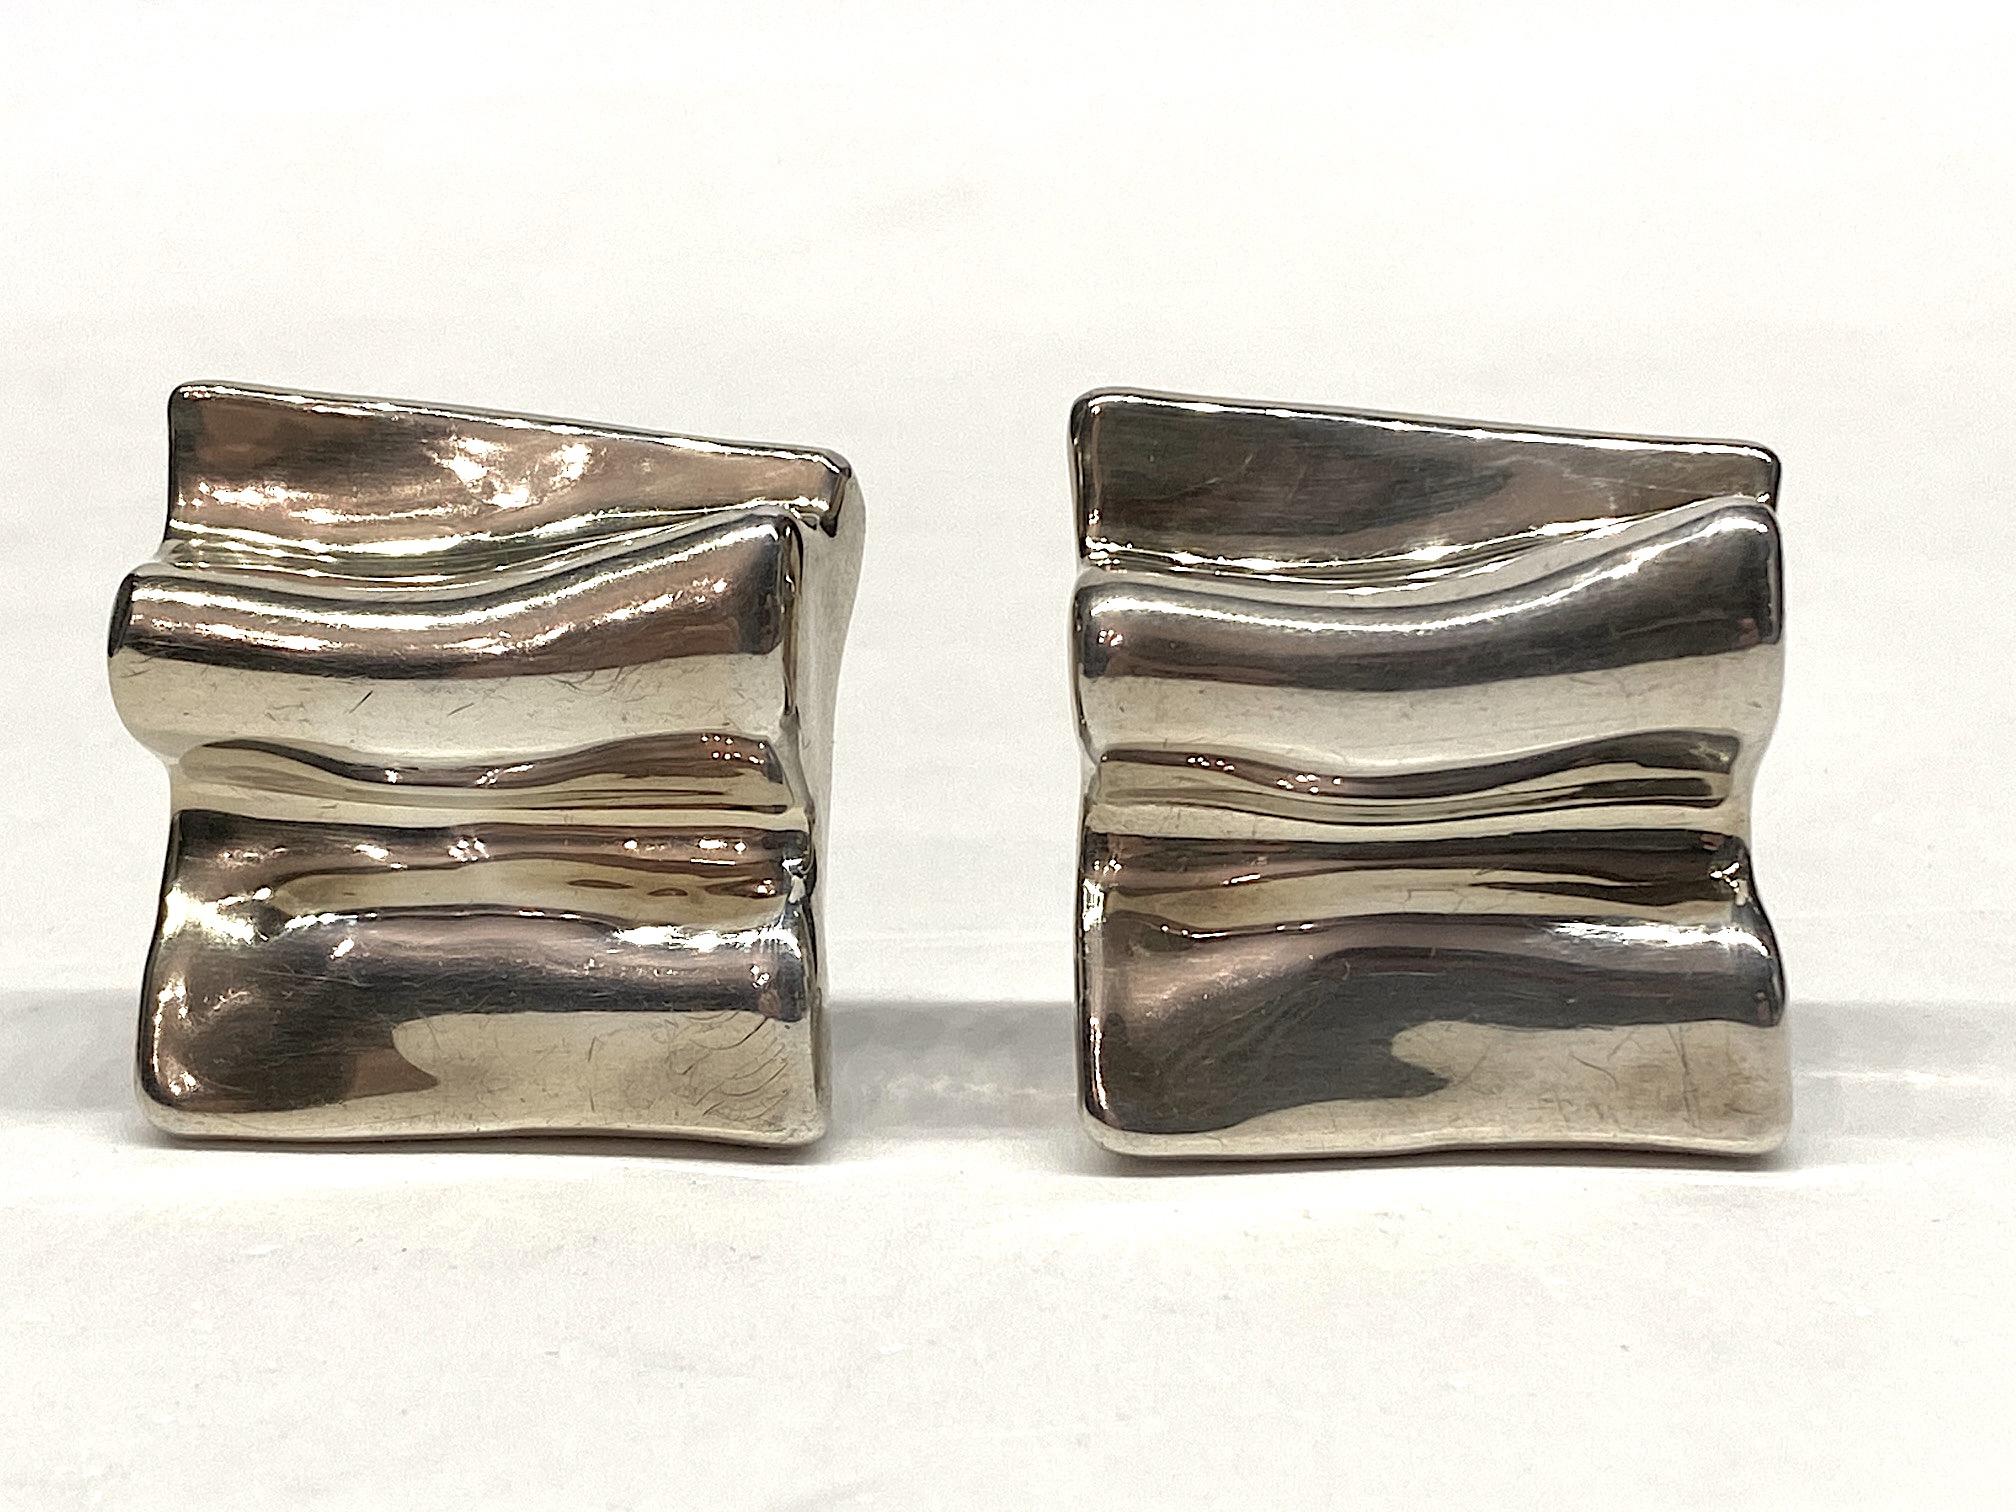 A wonderful and sculptural pair of abstract sterling silver square button earrings. Each measures 1.38 inches wide, 1.5 inches tall and .5 of an inch deep not including the clip back. The earrings are made in the electroform method. First a model is